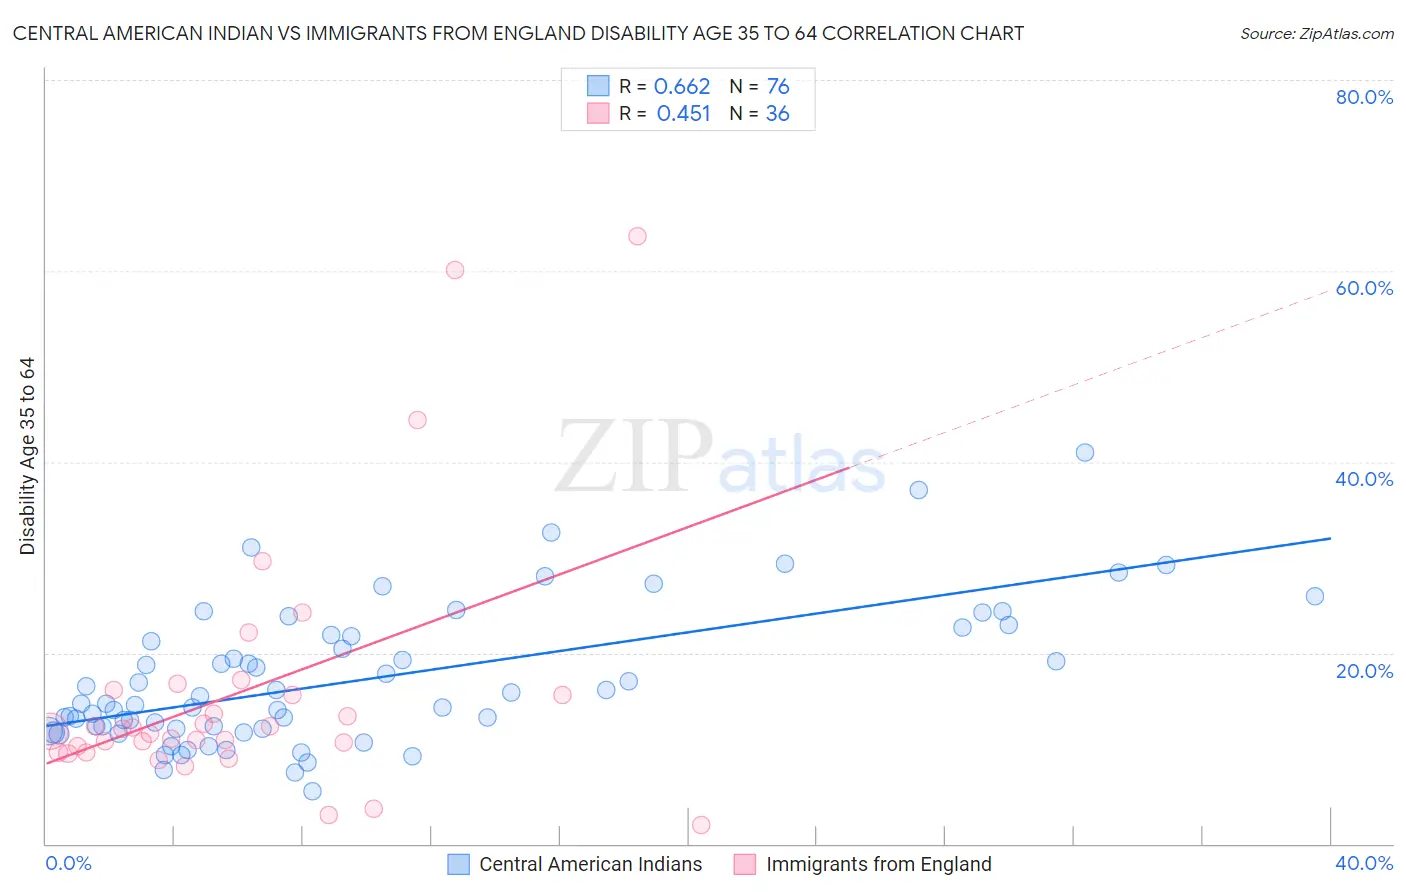 Central American Indian vs Immigrants from England Disability Age 35 to 64